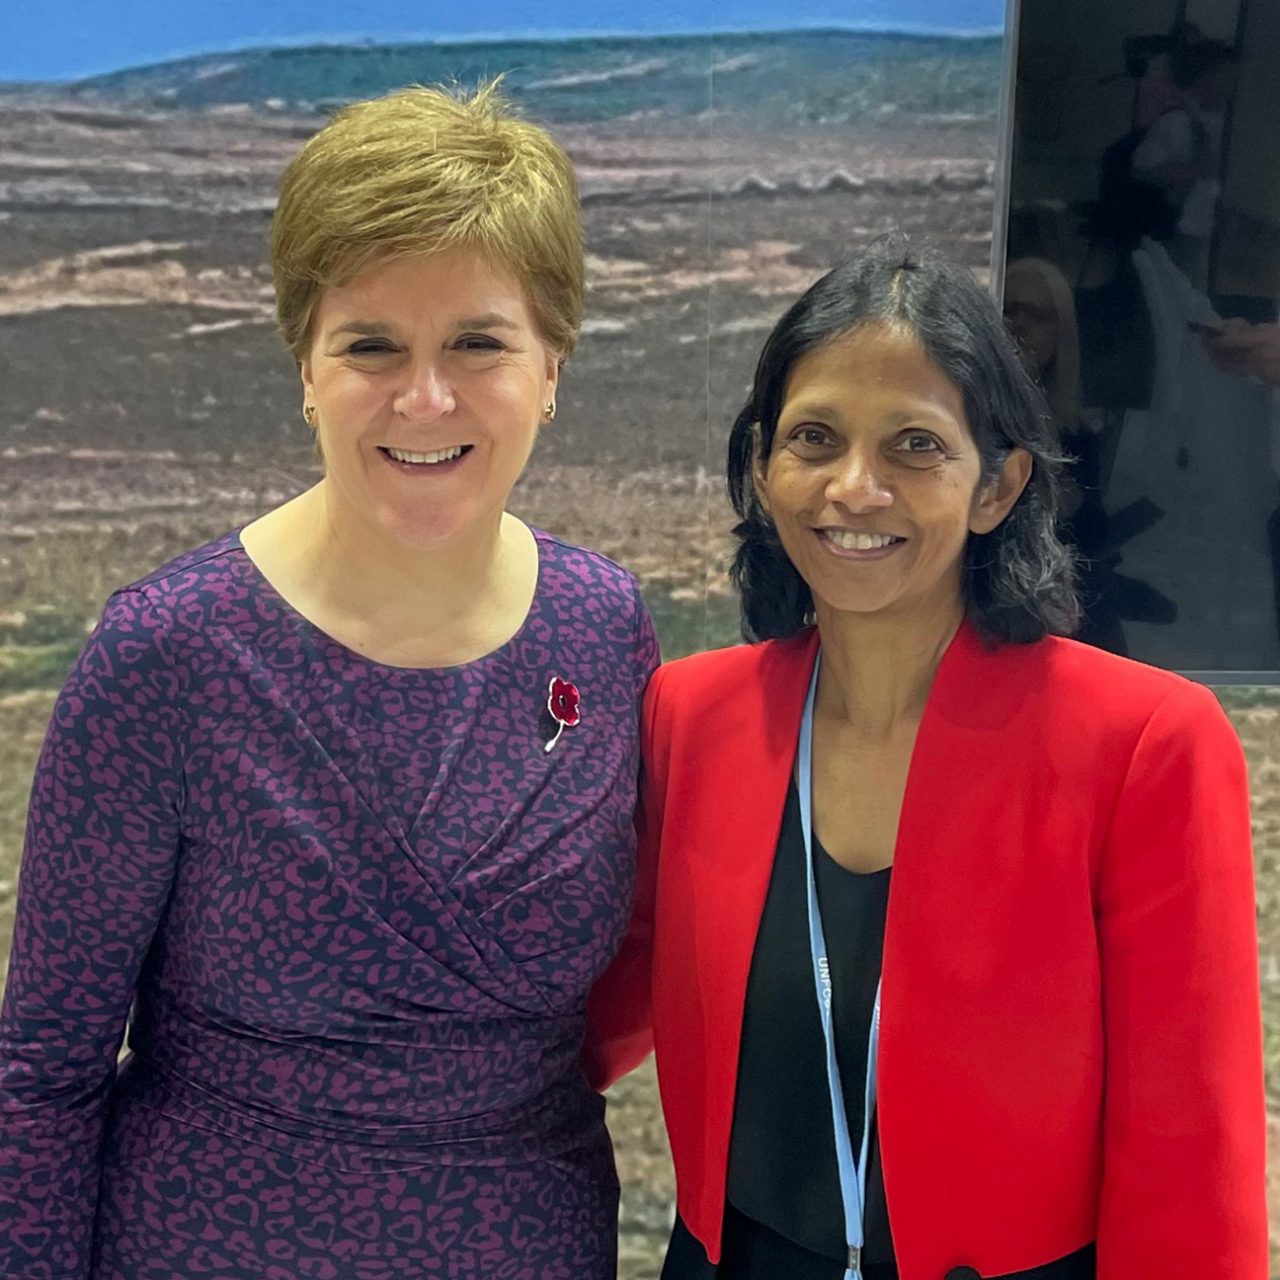 Macquarie Group Managing Director and CEO Shemara Wikramanayake (right), with First Minister of Scotland Nicola Sturgeon, at the Scotland Pavilion